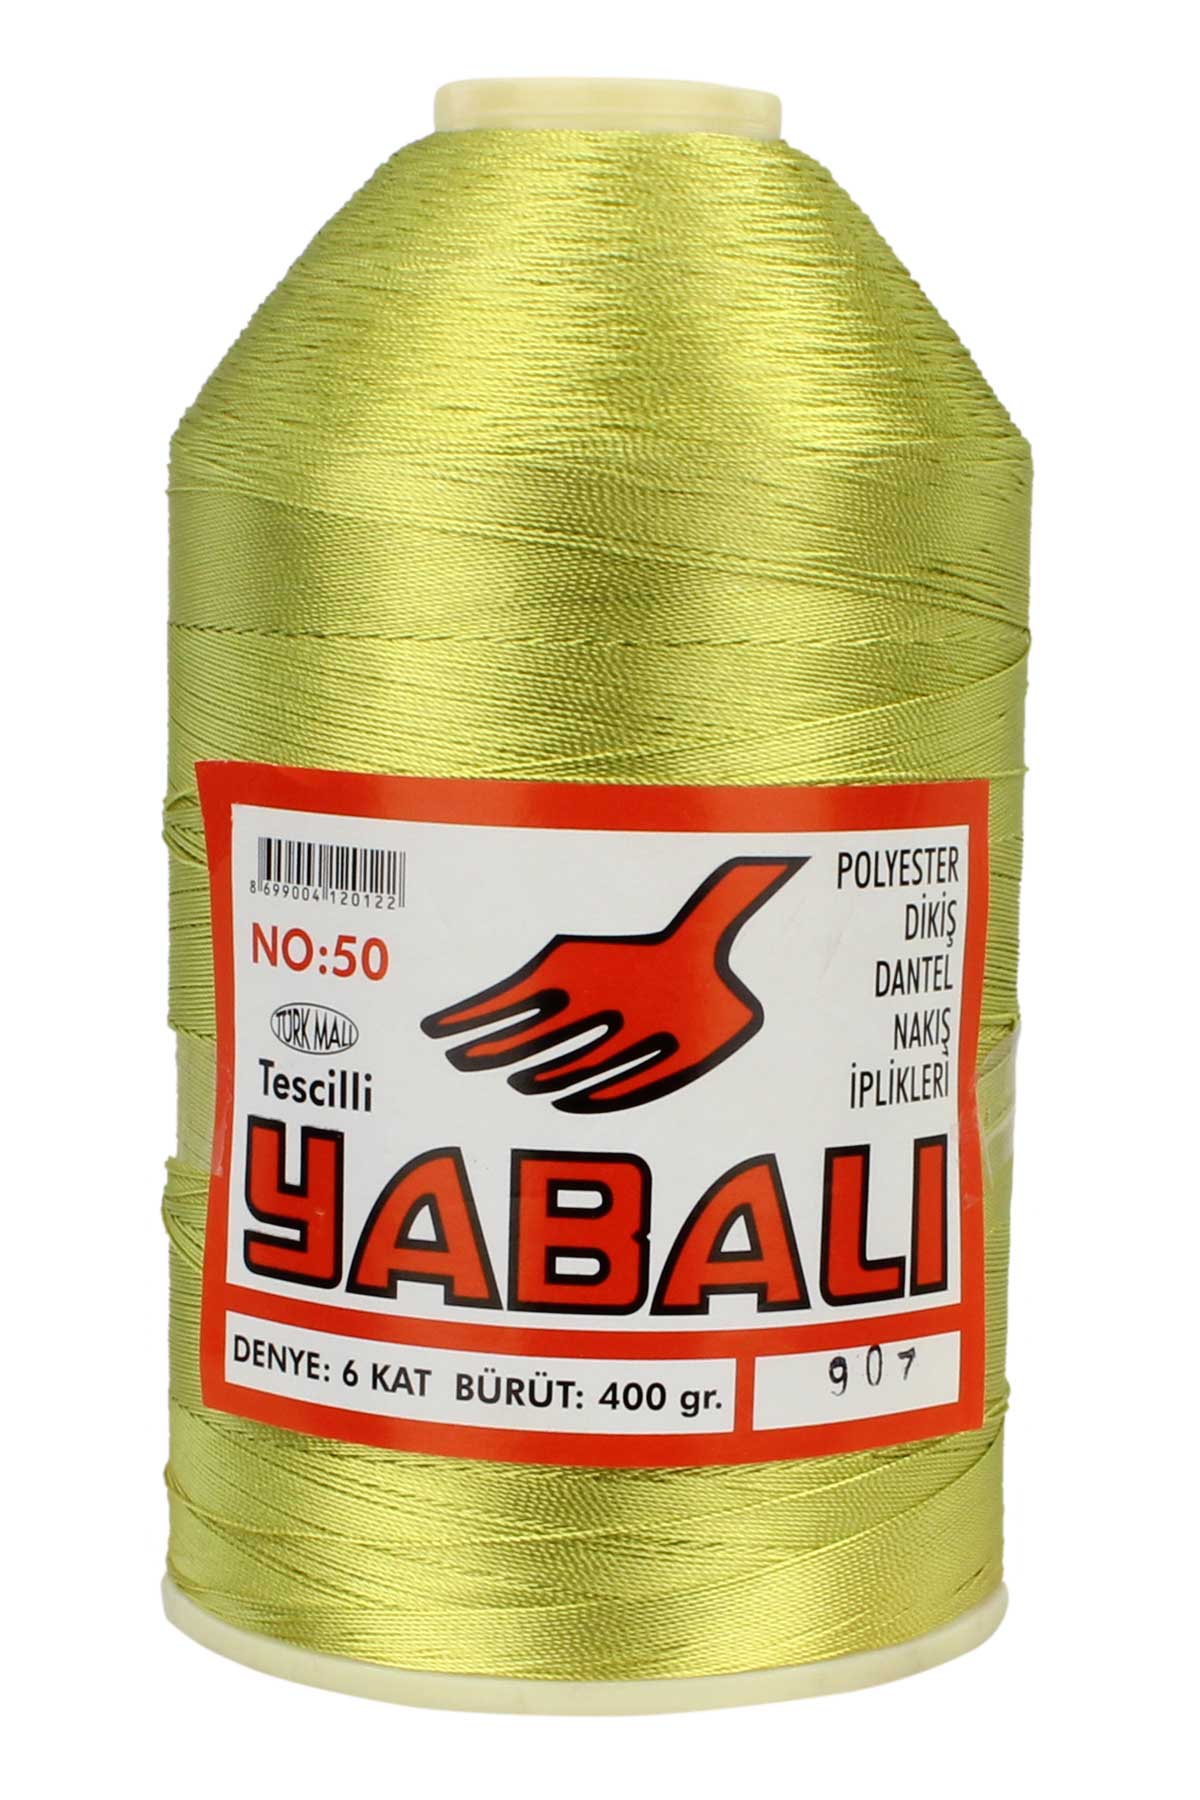 Yabali 6 Ply Polyester Colorful Crochet Thread Size: 50